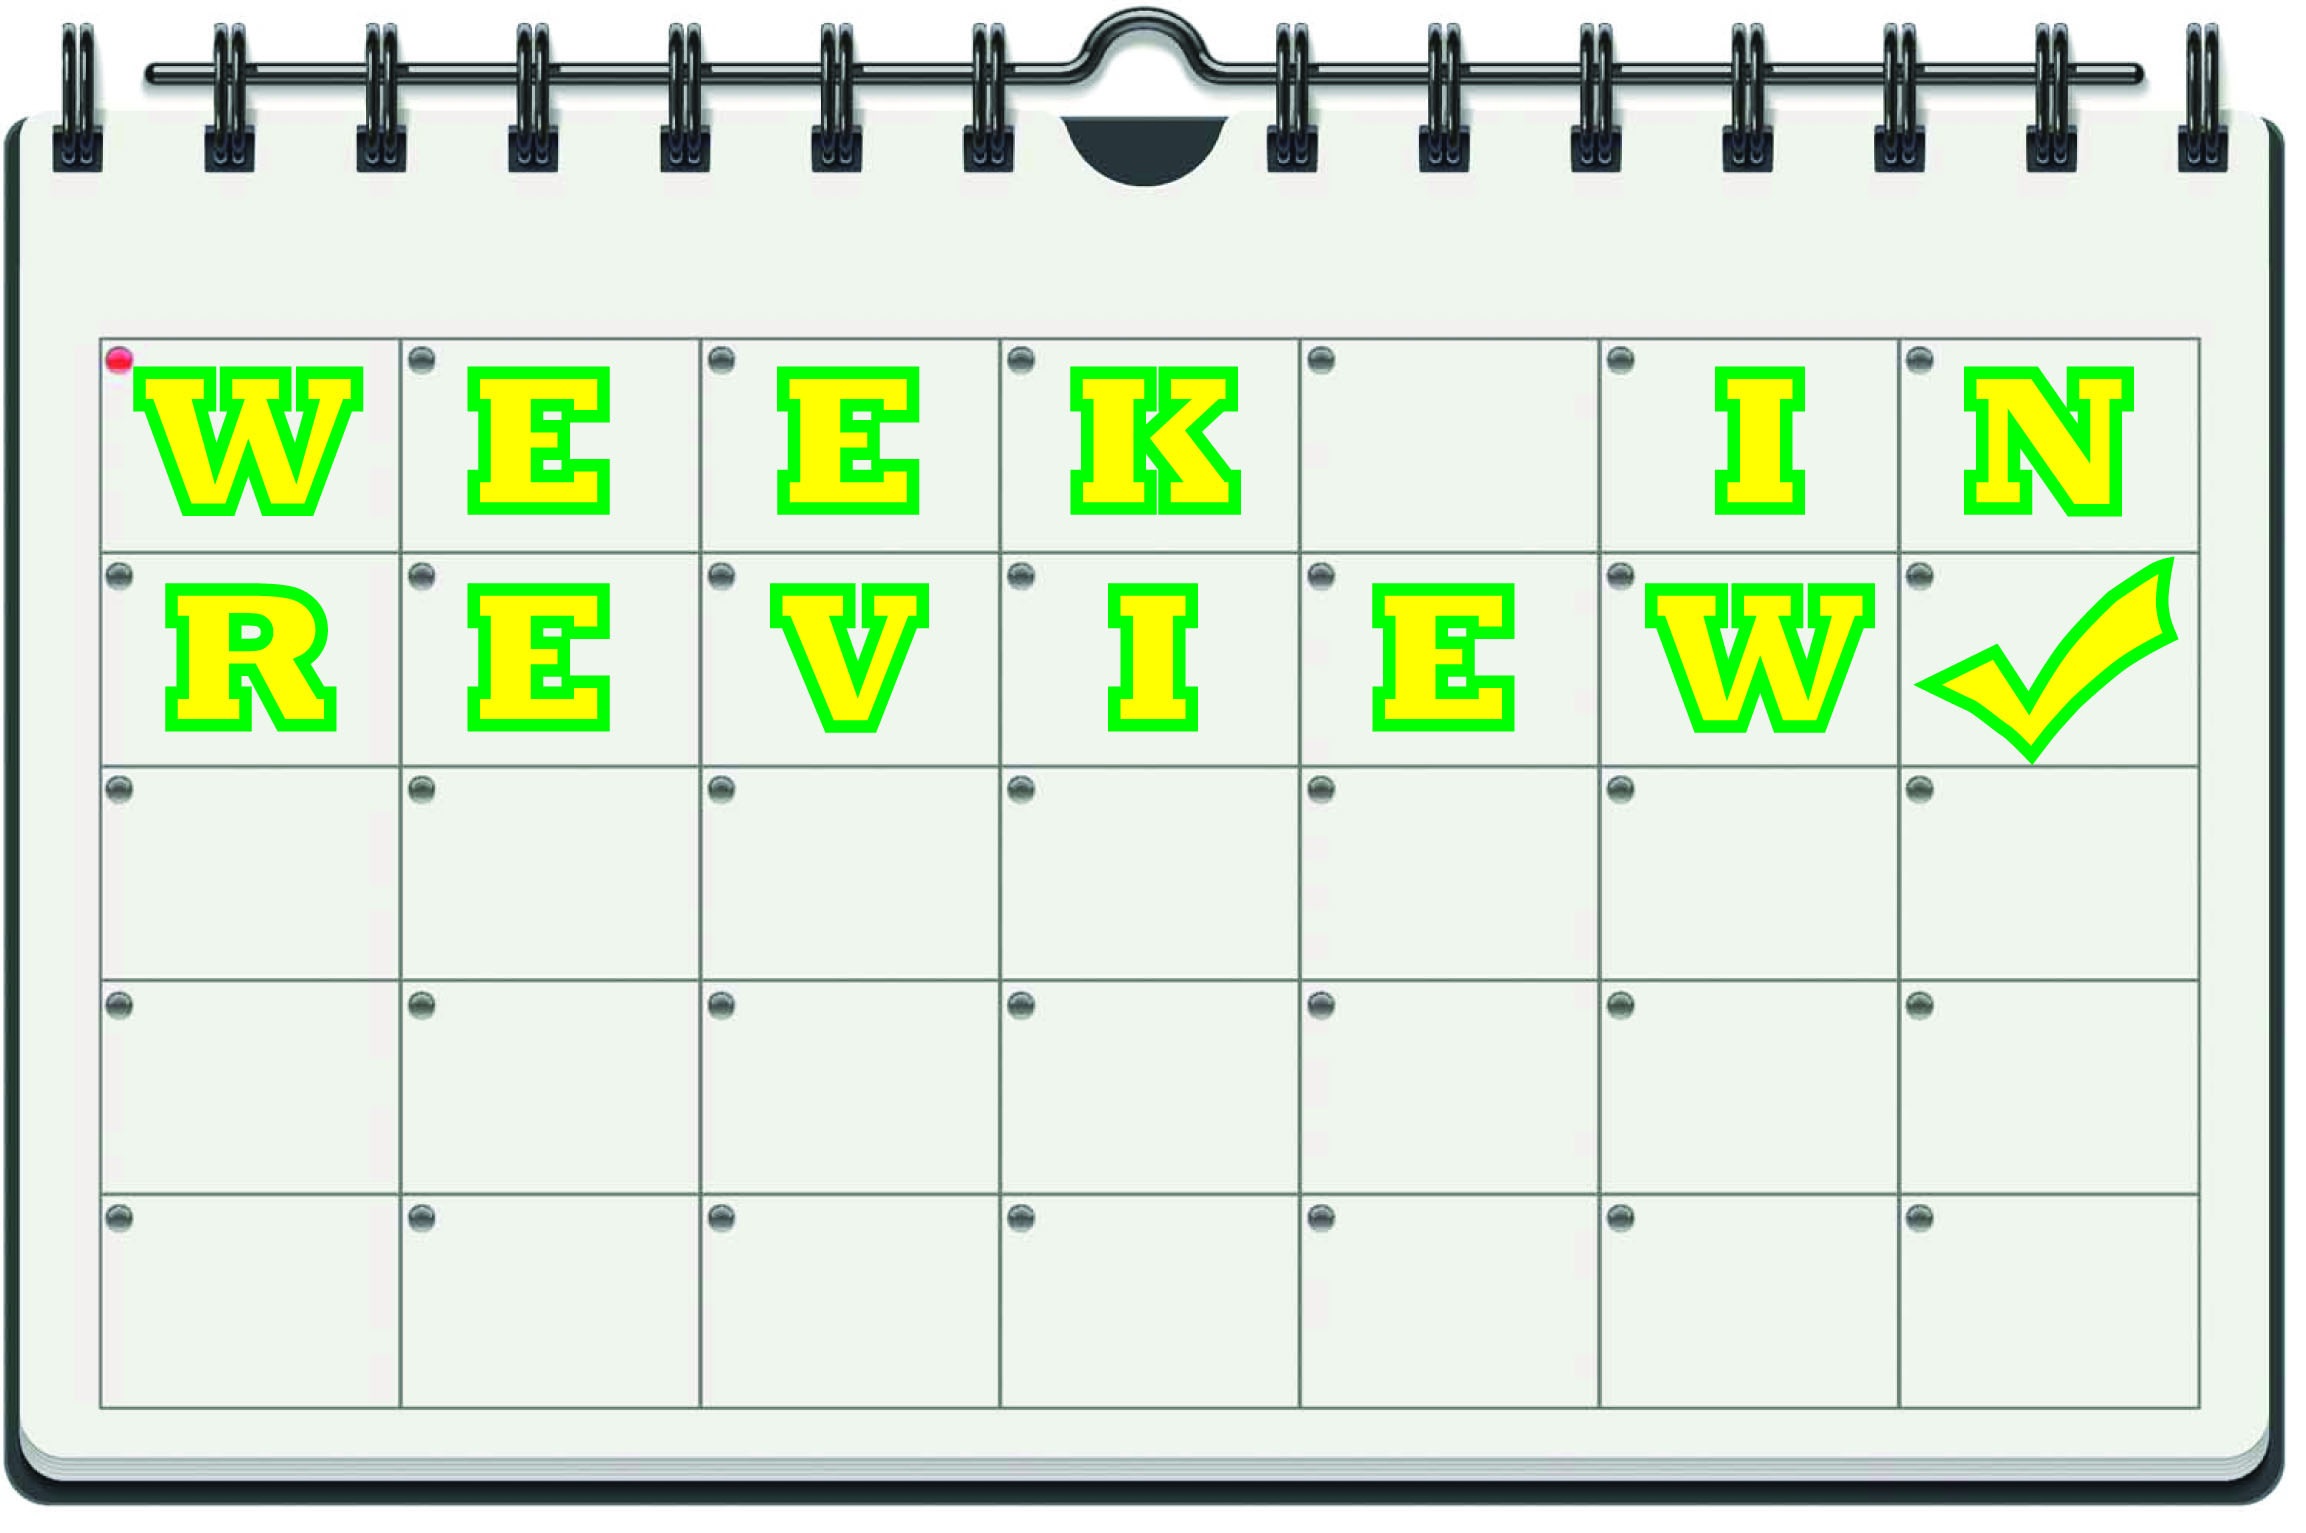 The Week in Review for March 17 to April 11, 2014